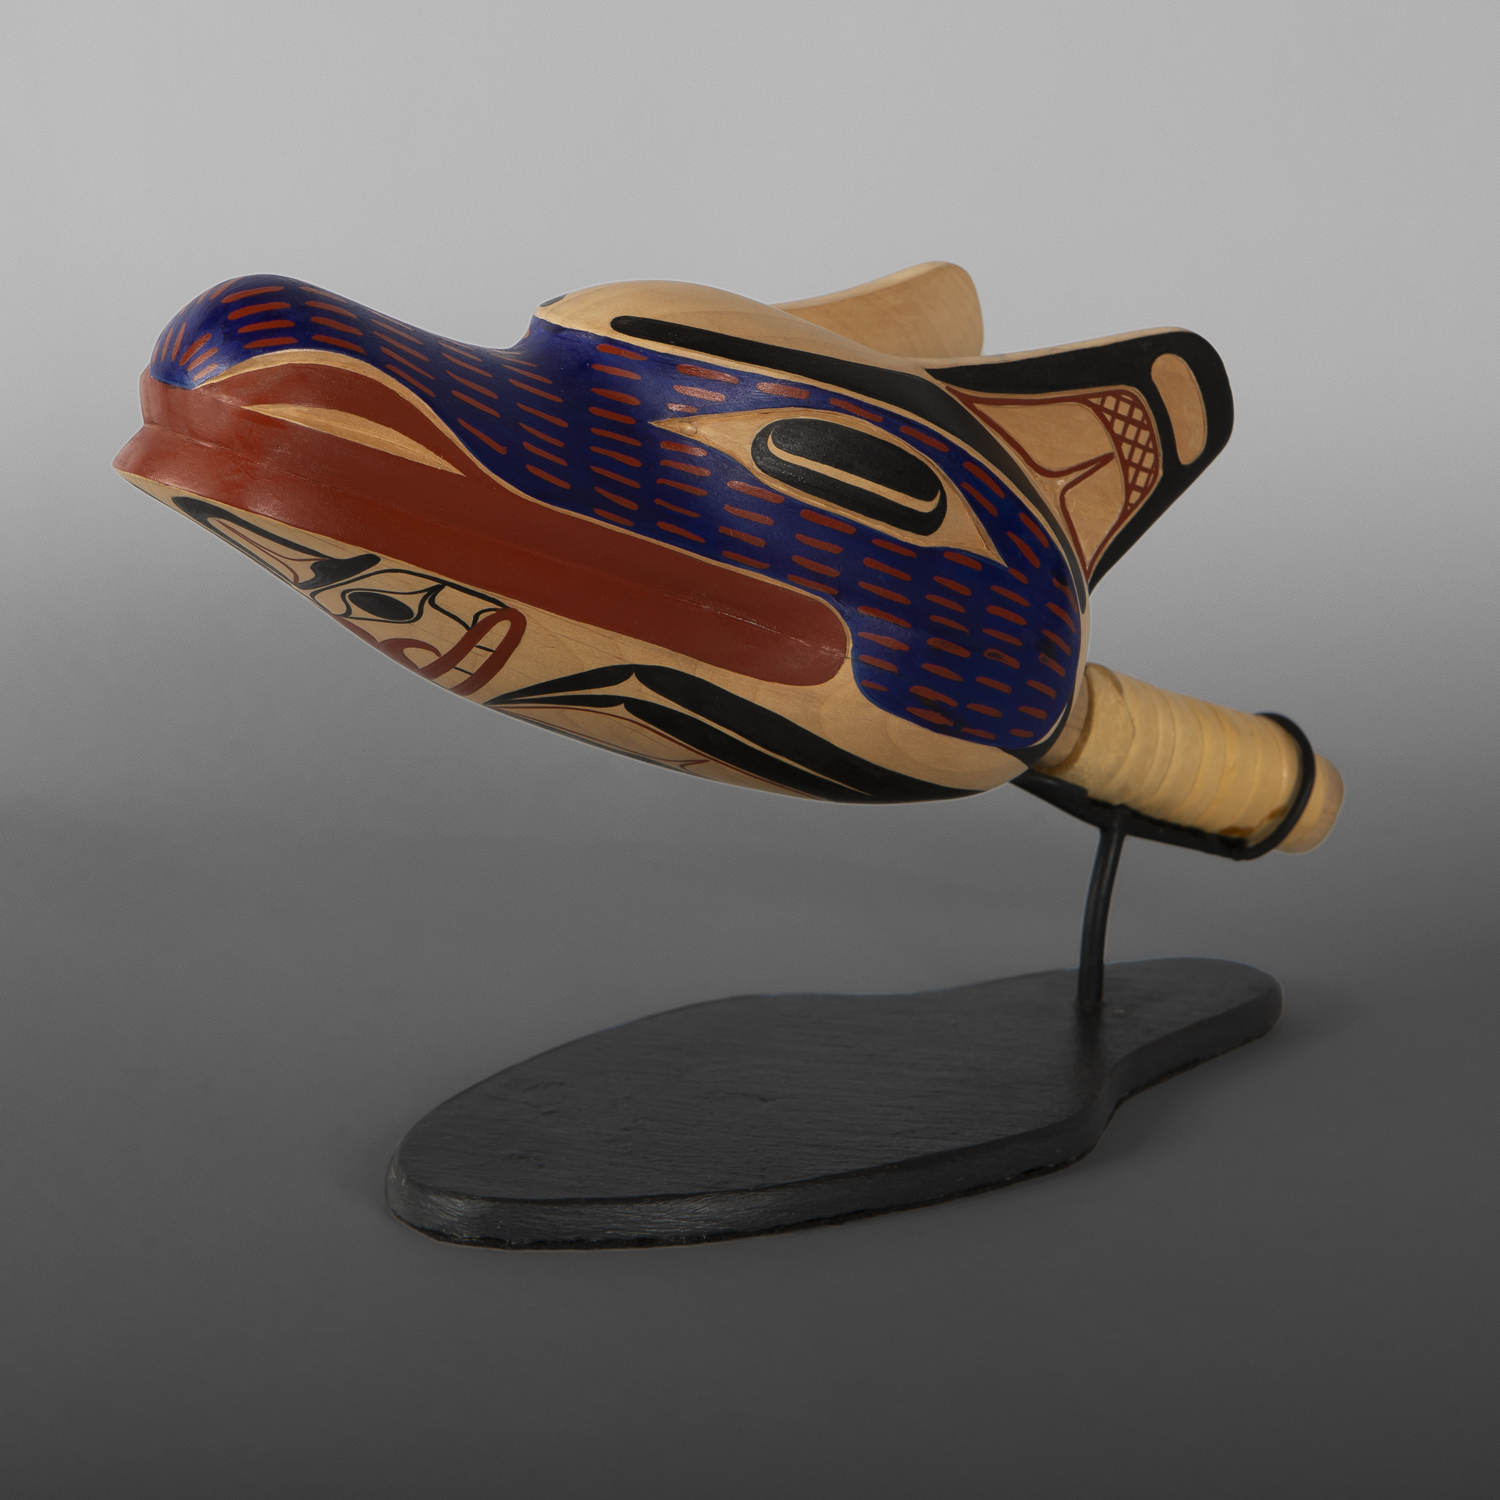 Wolf Rattle
David A Boxley
Tsimshian
Alder, leather, paint, beads, custom stand
12" x 4" x 4" x (&"  high with stand)
$5800